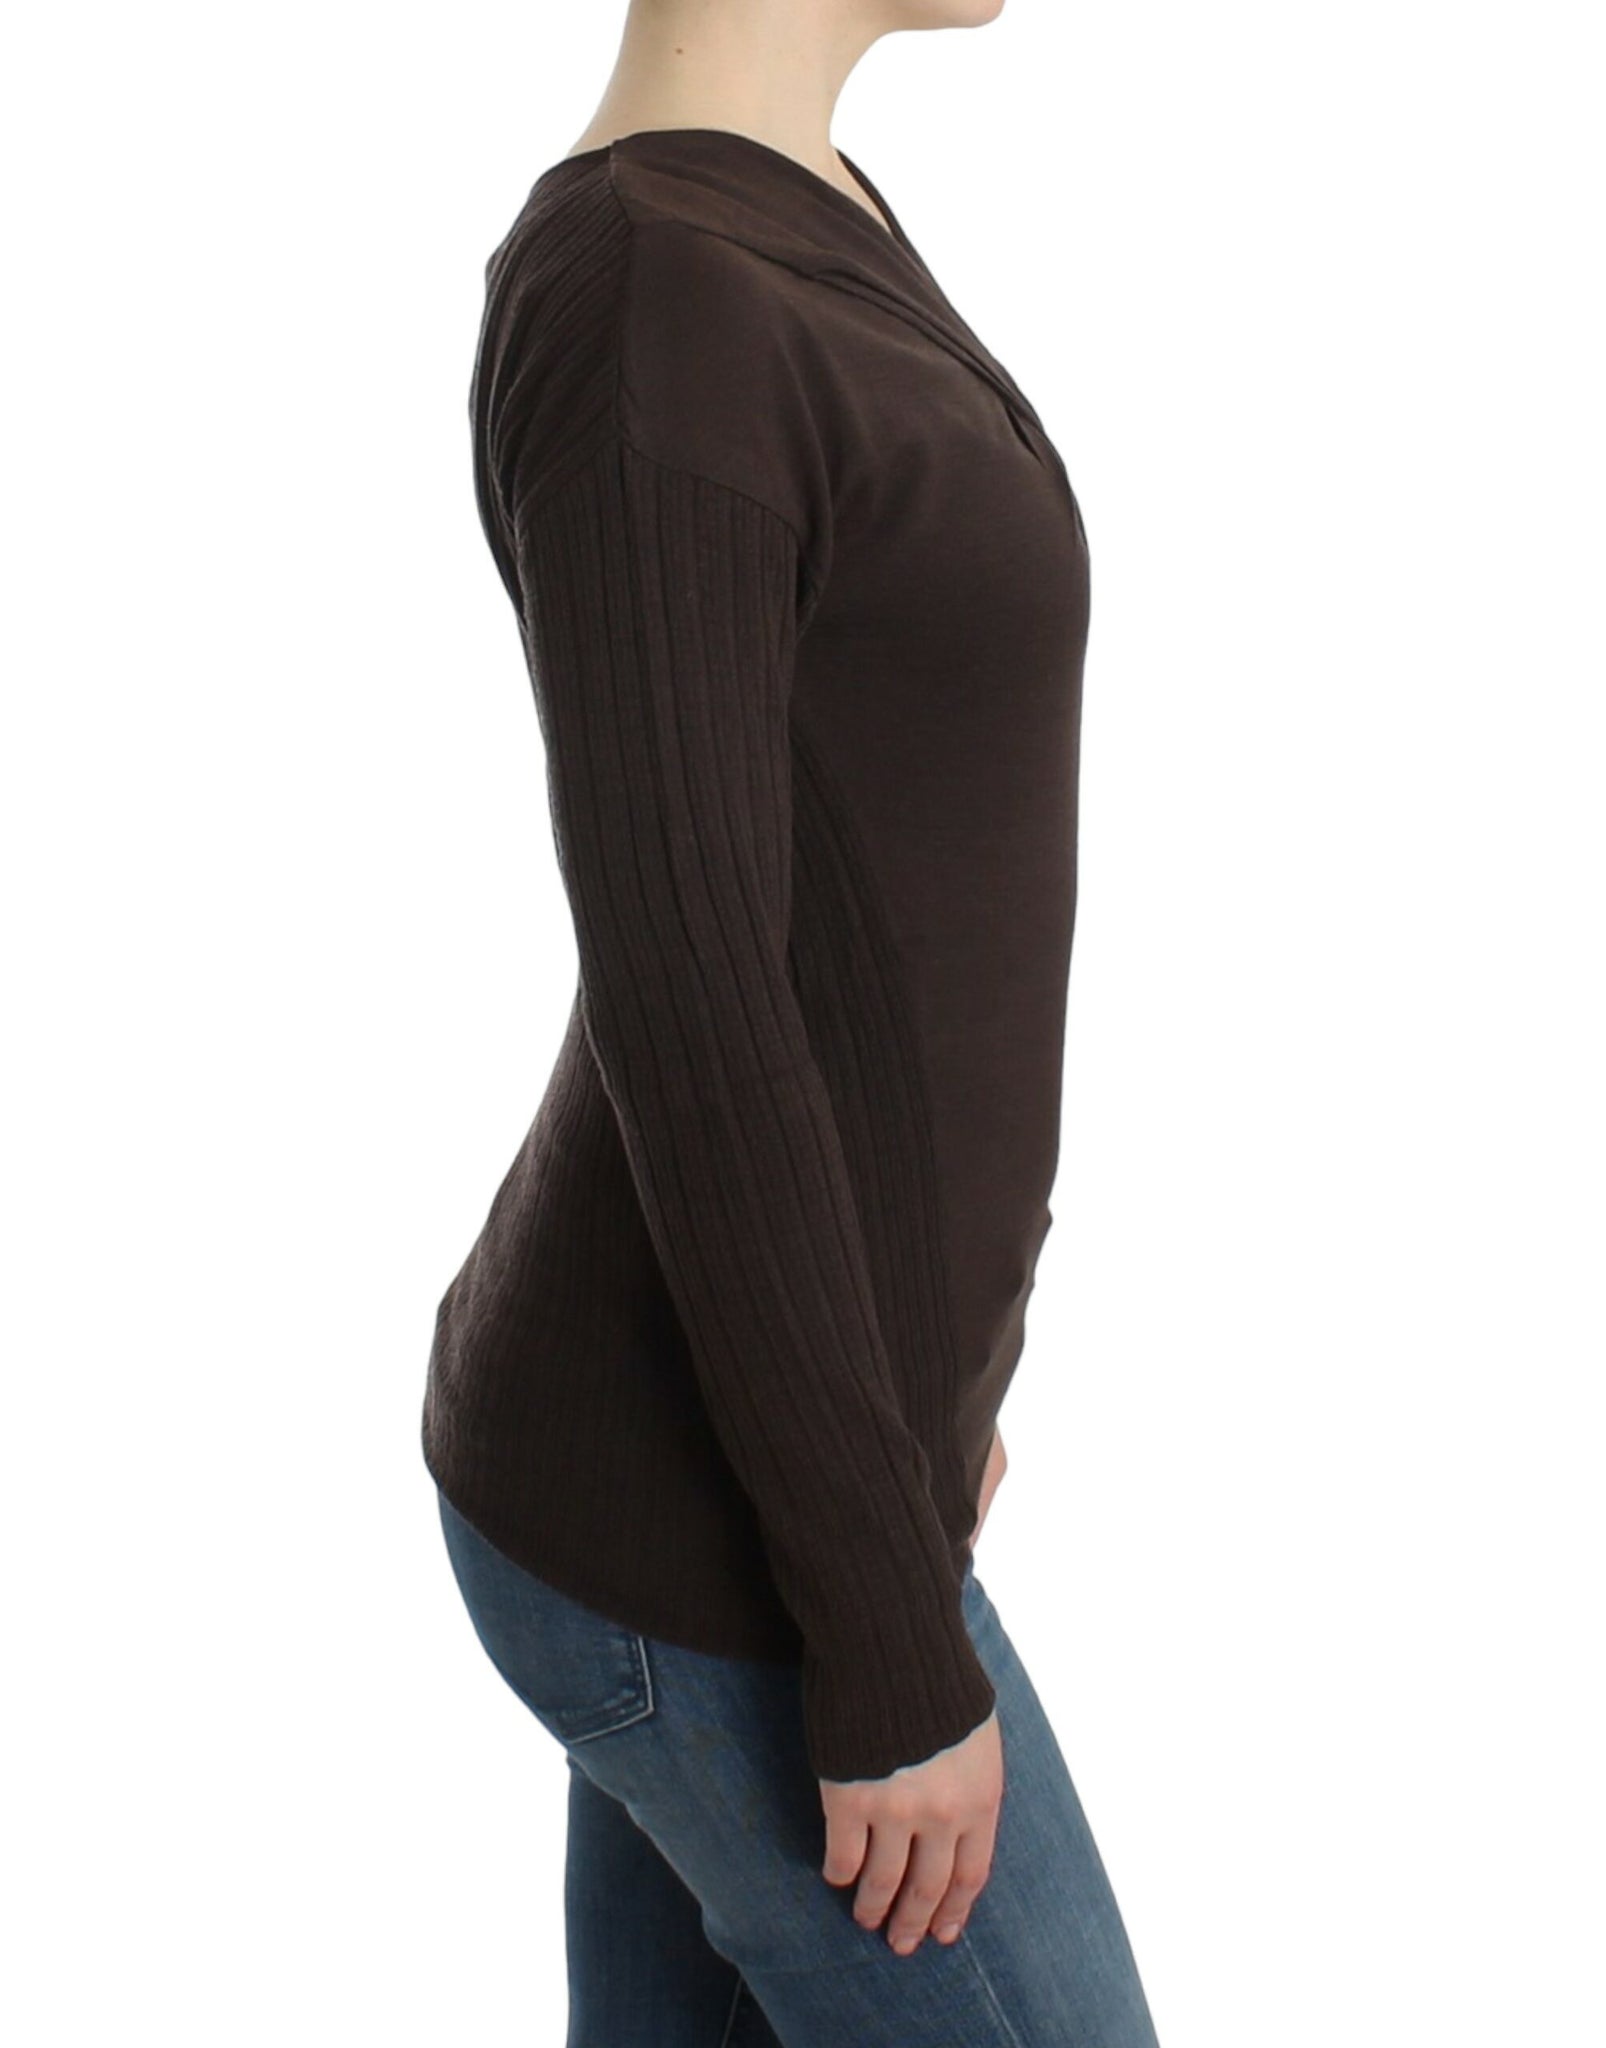 Brown knitted wool sweater